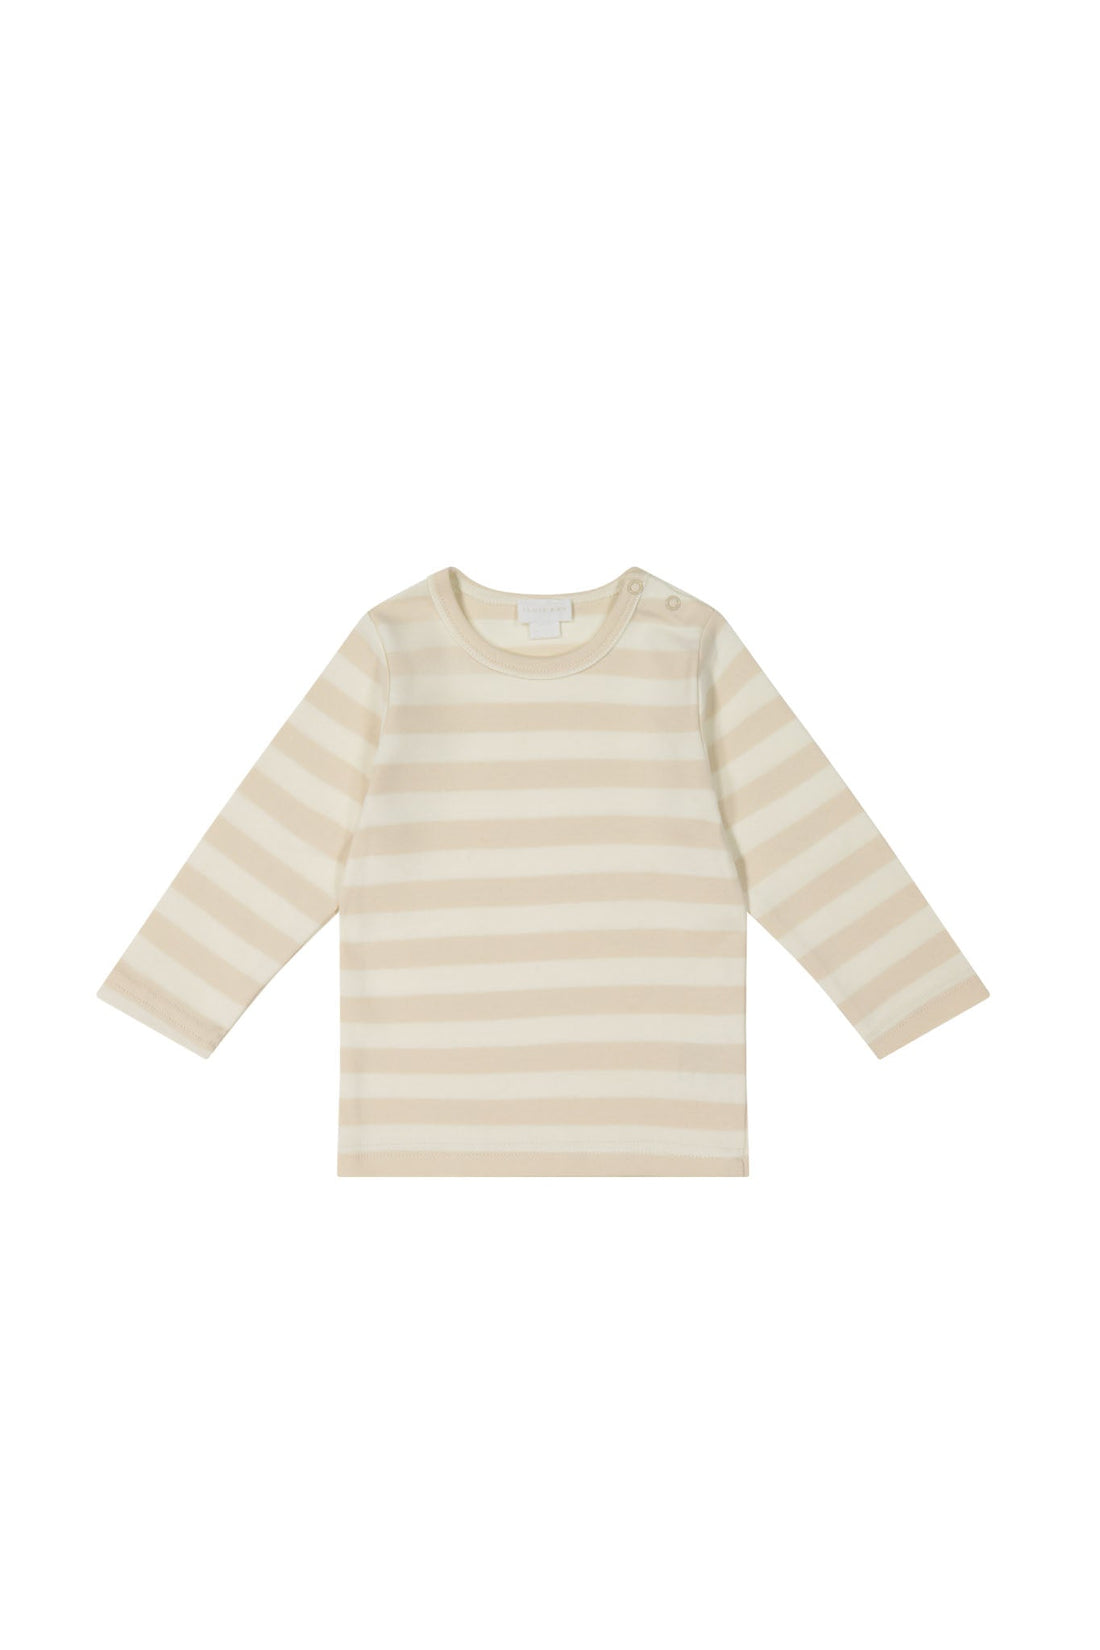 Pima Cotton Vinny Long Sleeve Top - Weekday Stripe Childrens Top from Jamie Kay USA